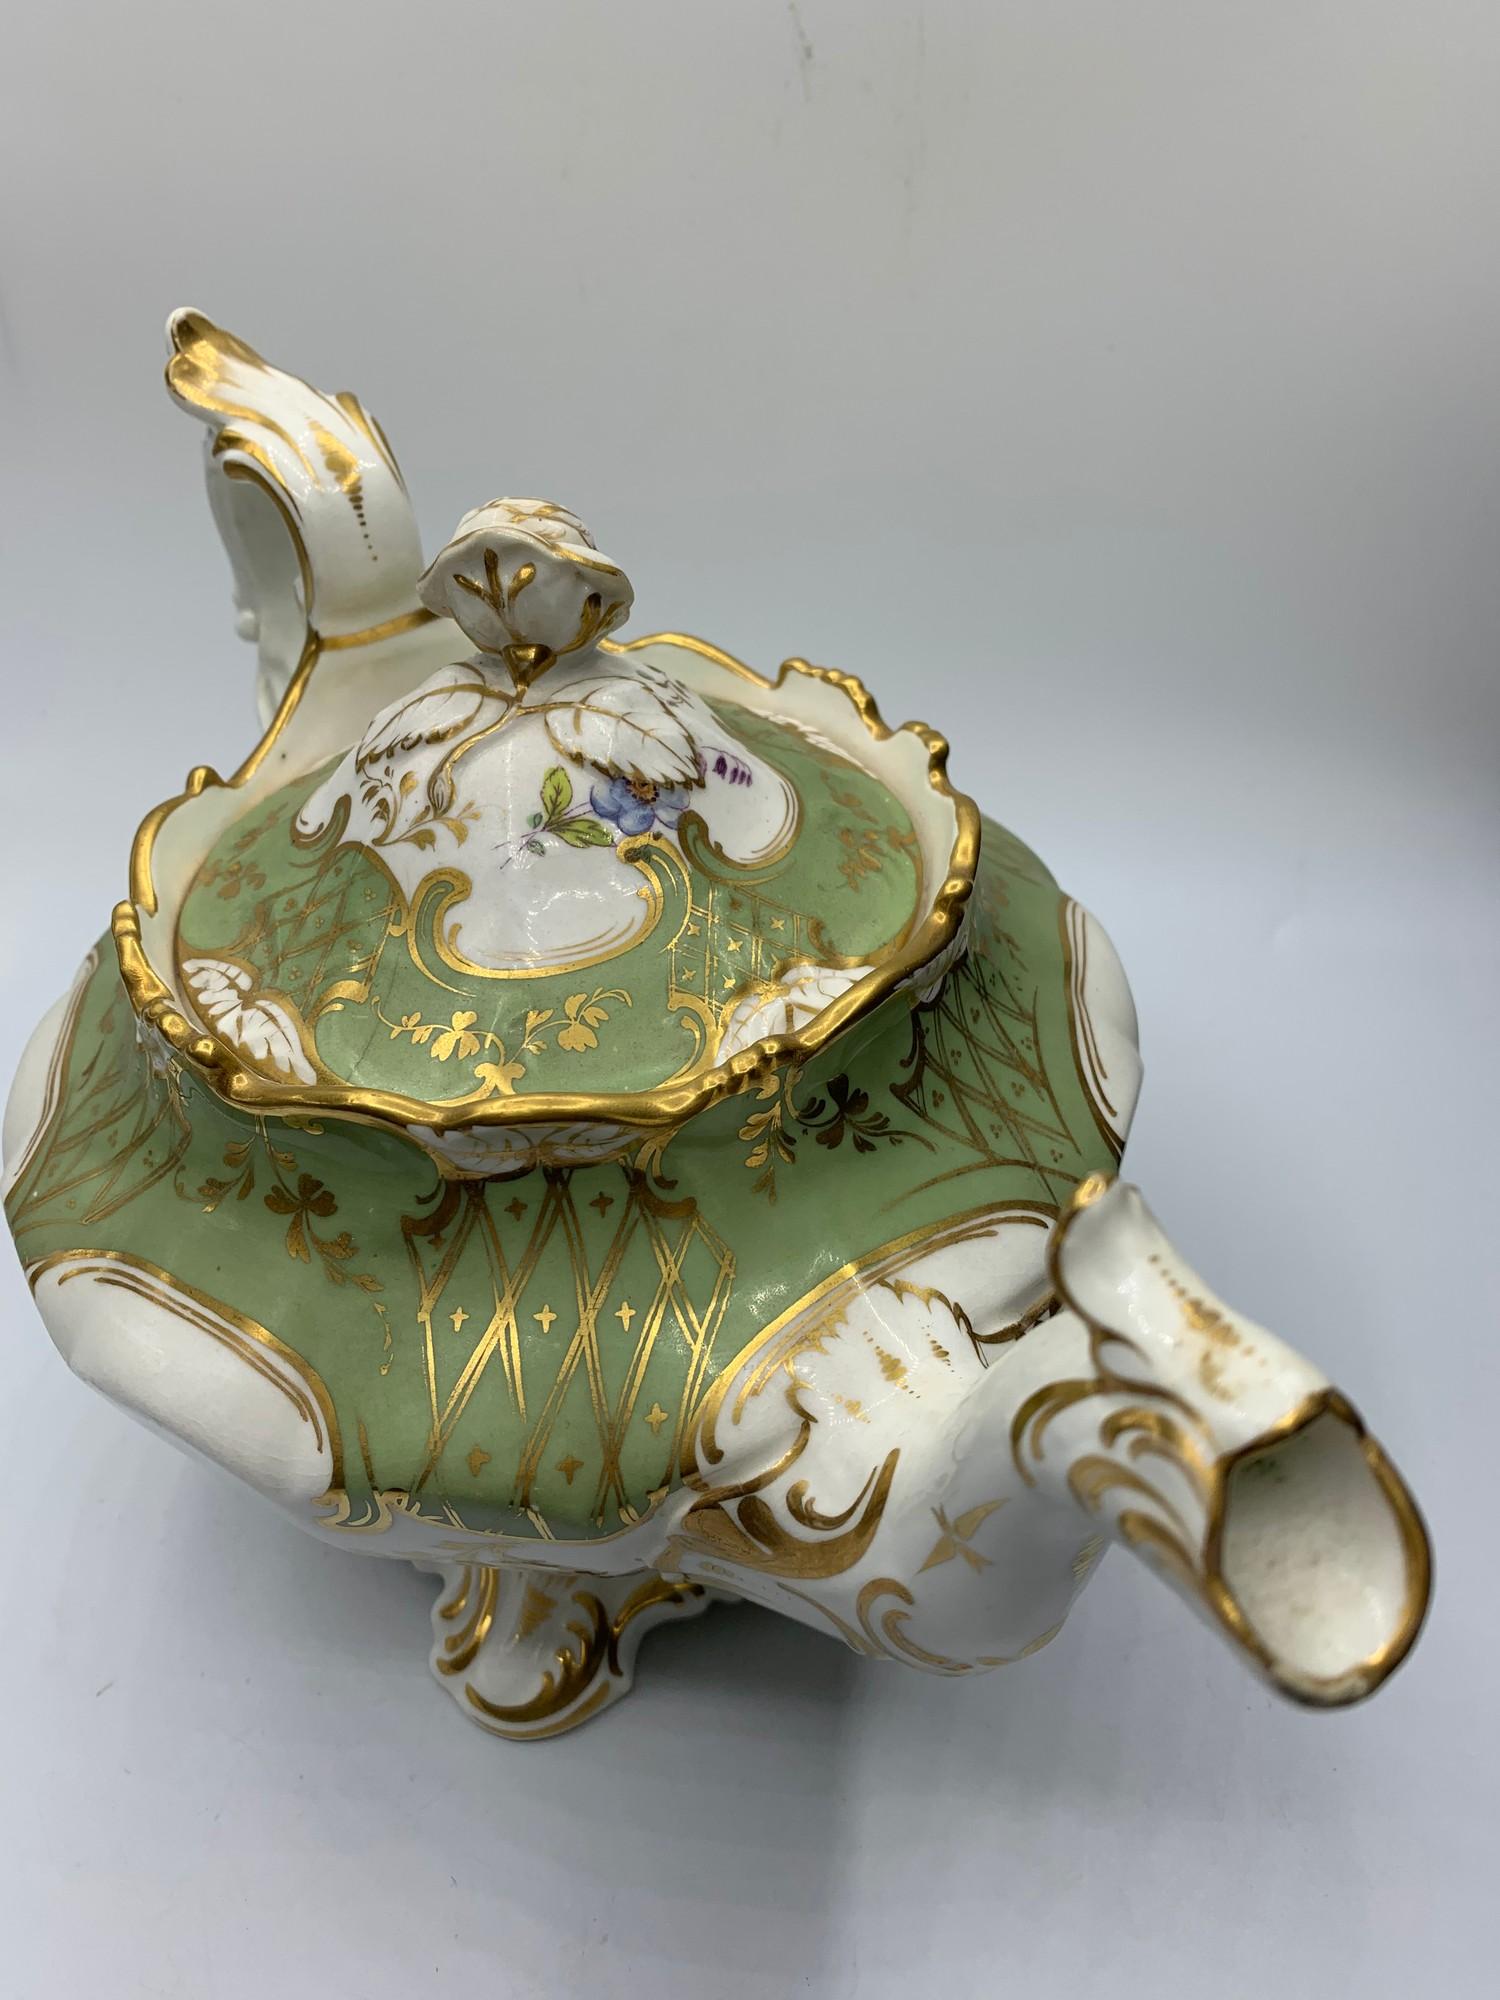 H&R Daniel second bell shape Teapot in good Rococo style with slanted rose on lid in good condition - Image 2 of 6